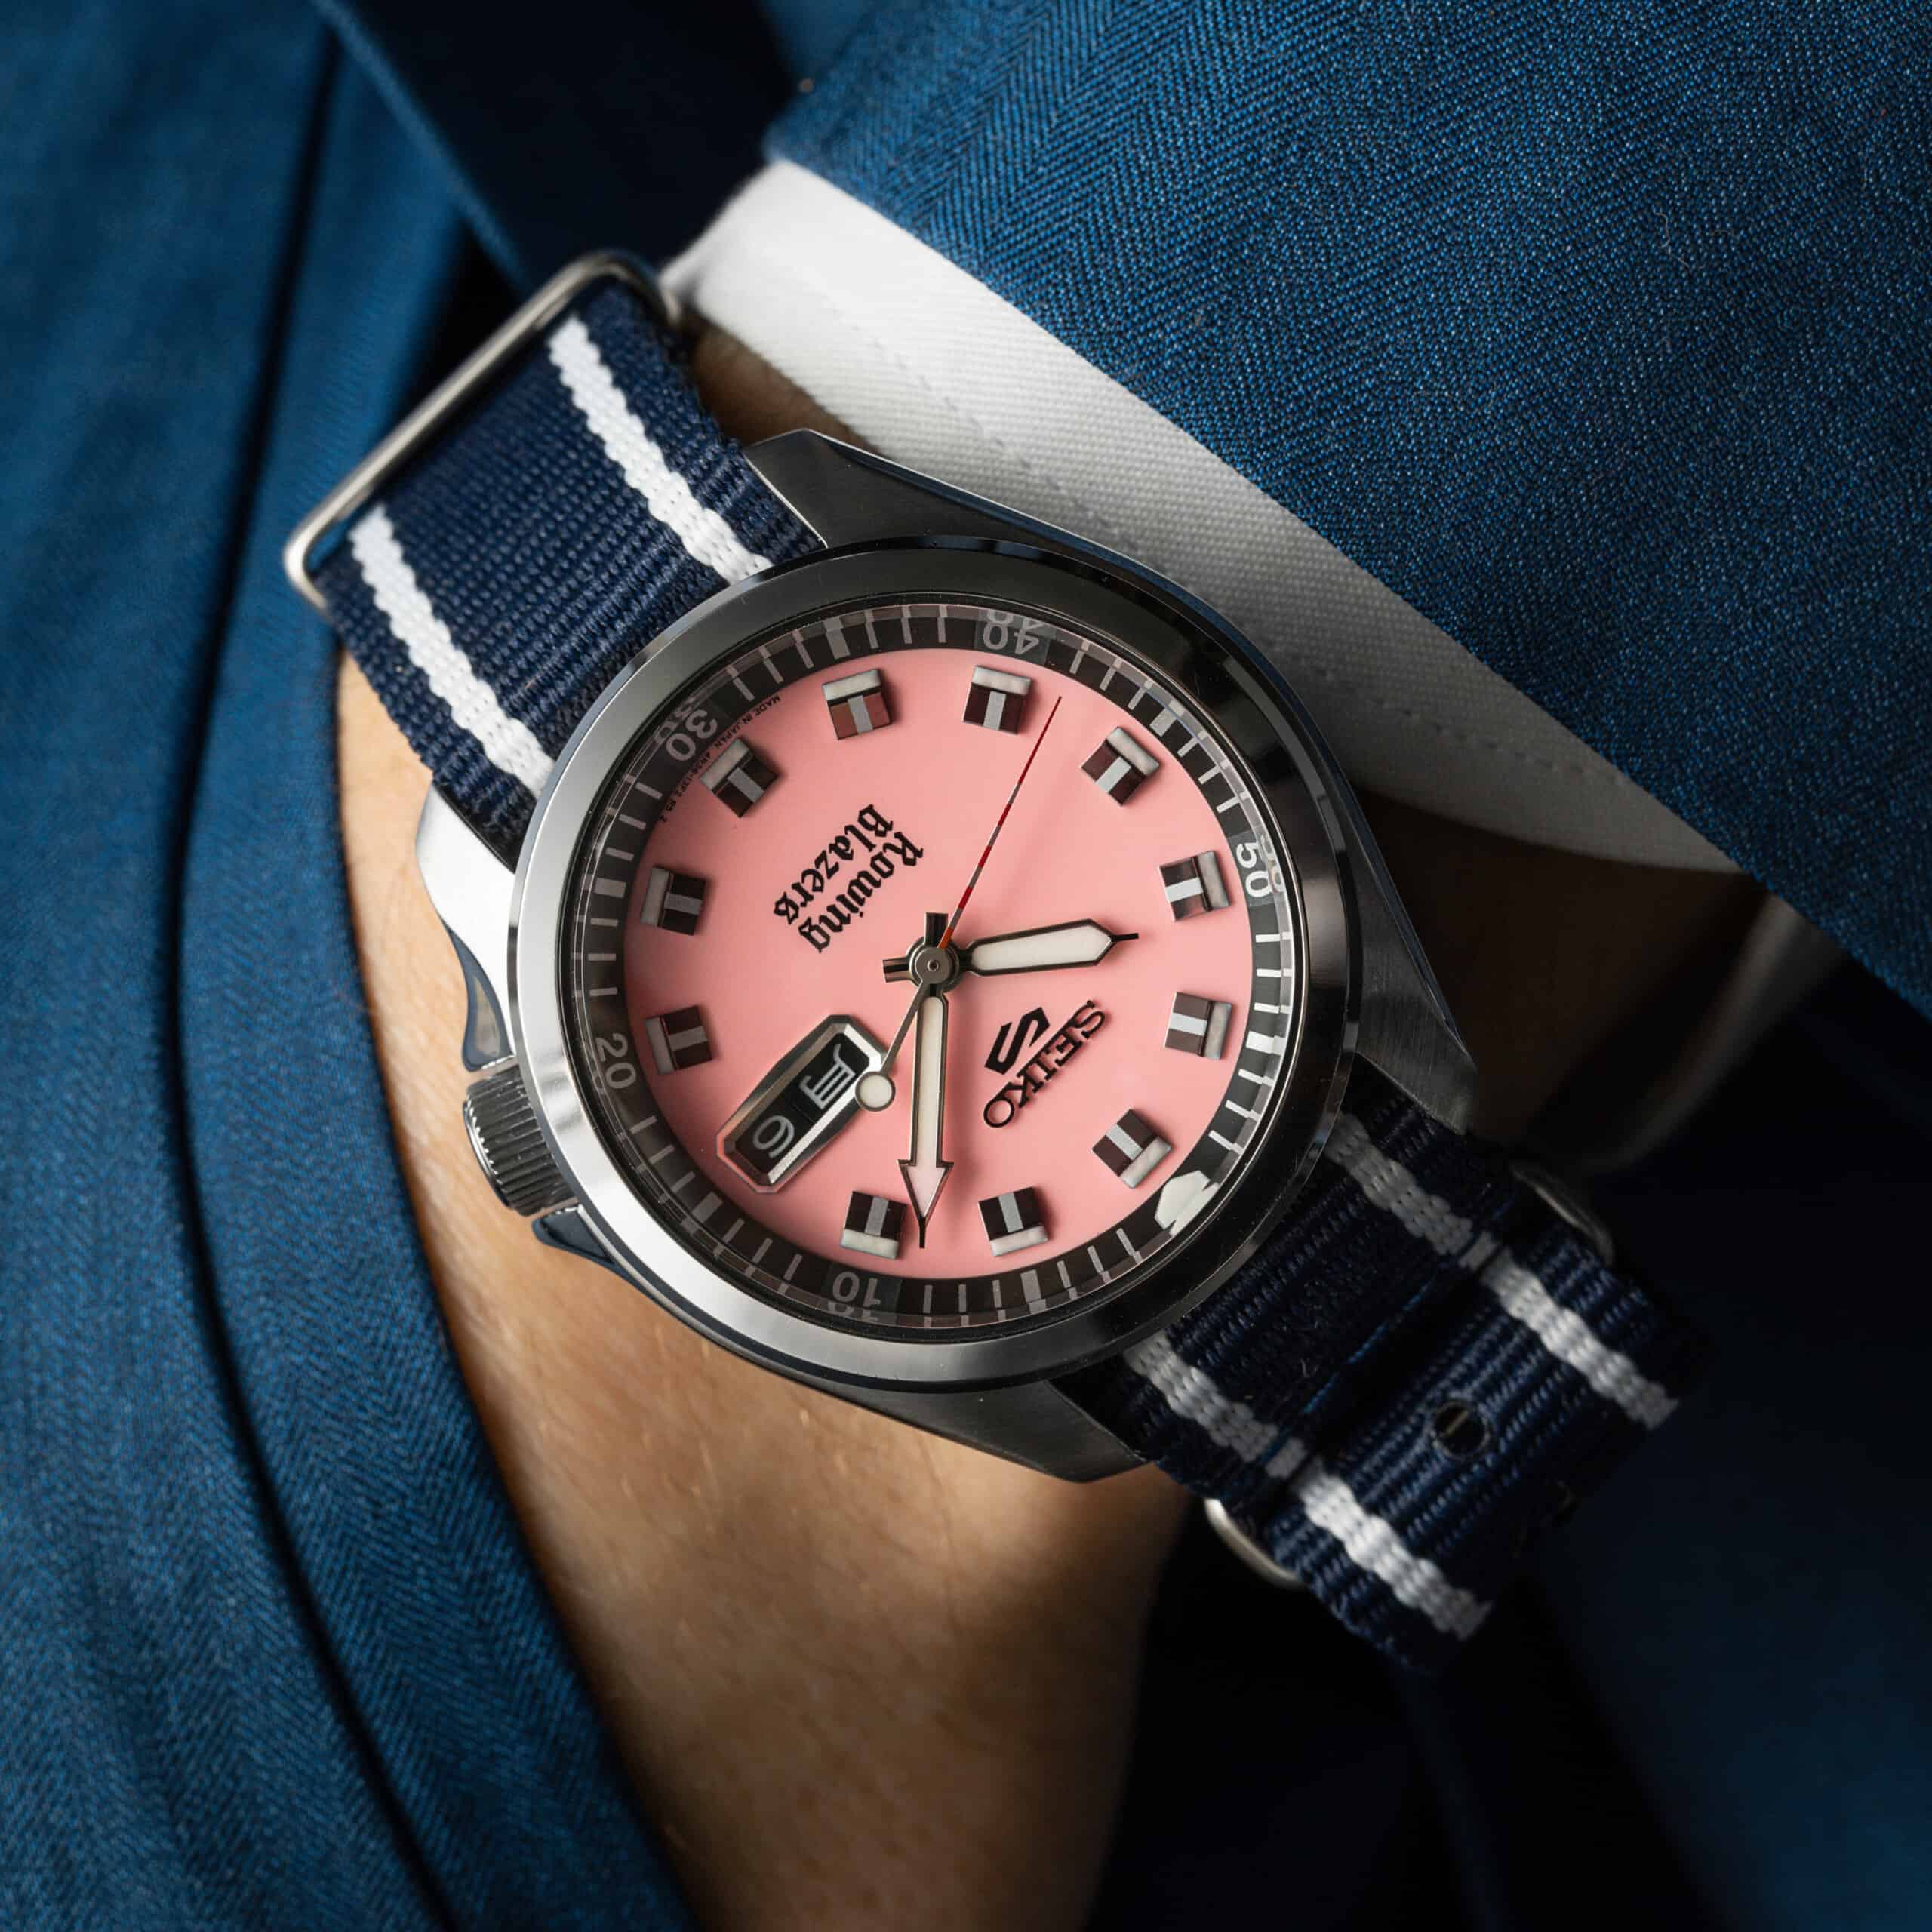 A Week In Watches Ep. 49: The Sea-Chron Returns & Rowing Blazers Hits the Seiko 5